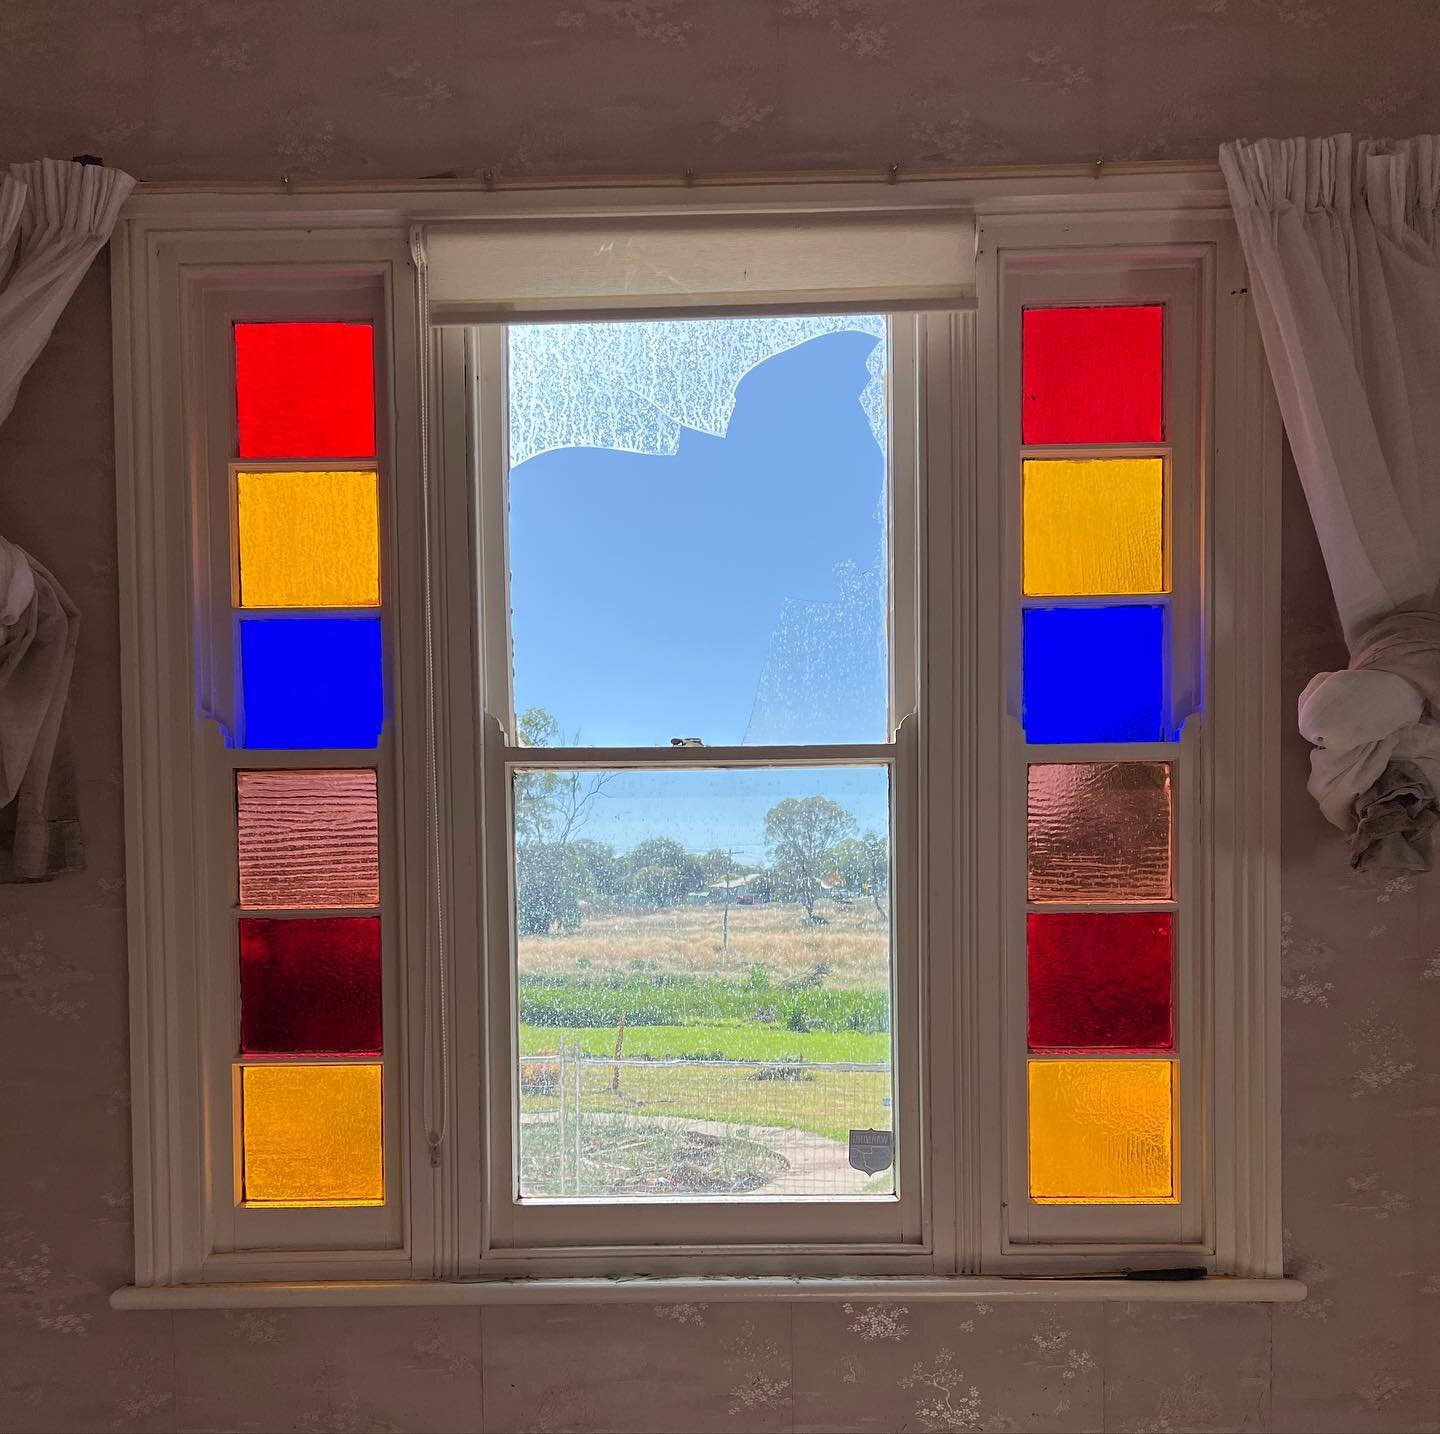 This homestead in #centralwesternnsw NSW has seen droughts and now another flood. Time to rebuild some precious history.  Looking from the inside out is one of the first steps and what a pleasure when you have these windows to glimpse through. #lands